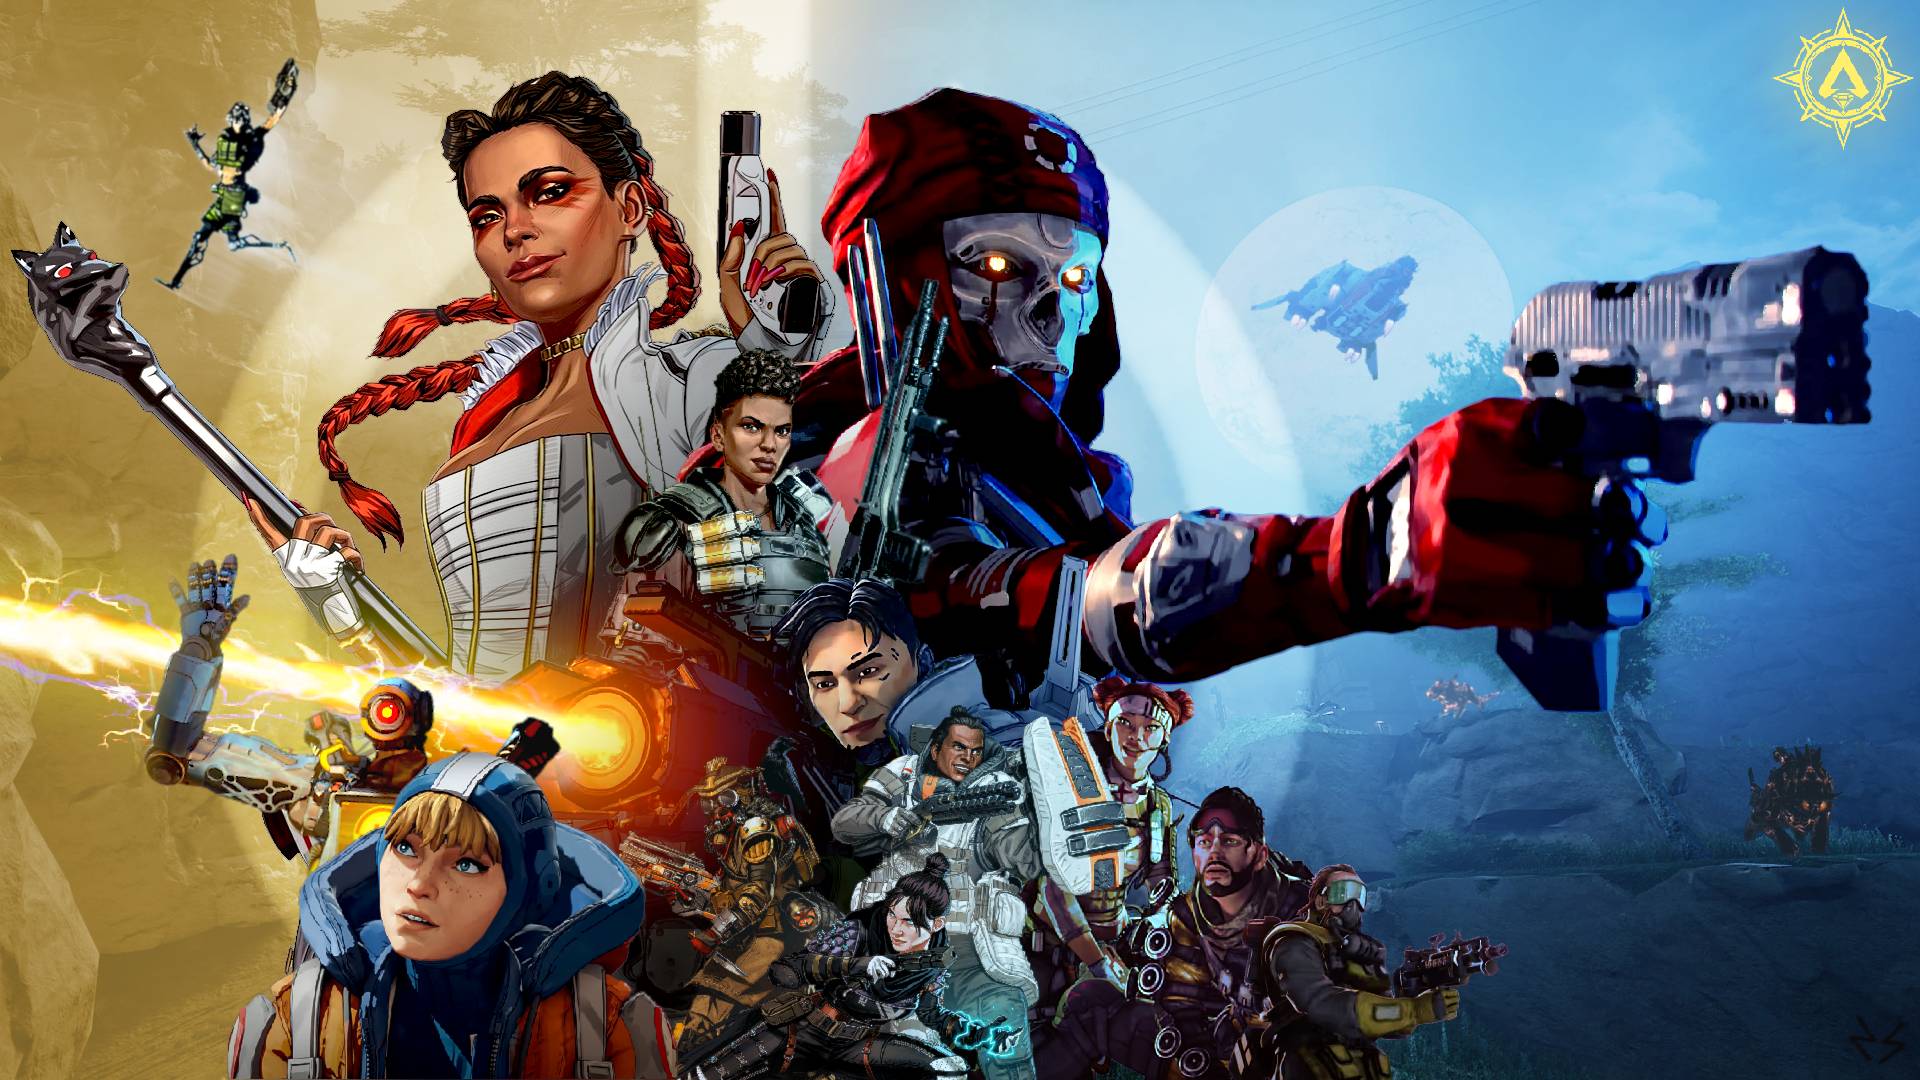 A collage of different Apex legends characters, against a gold and blue background